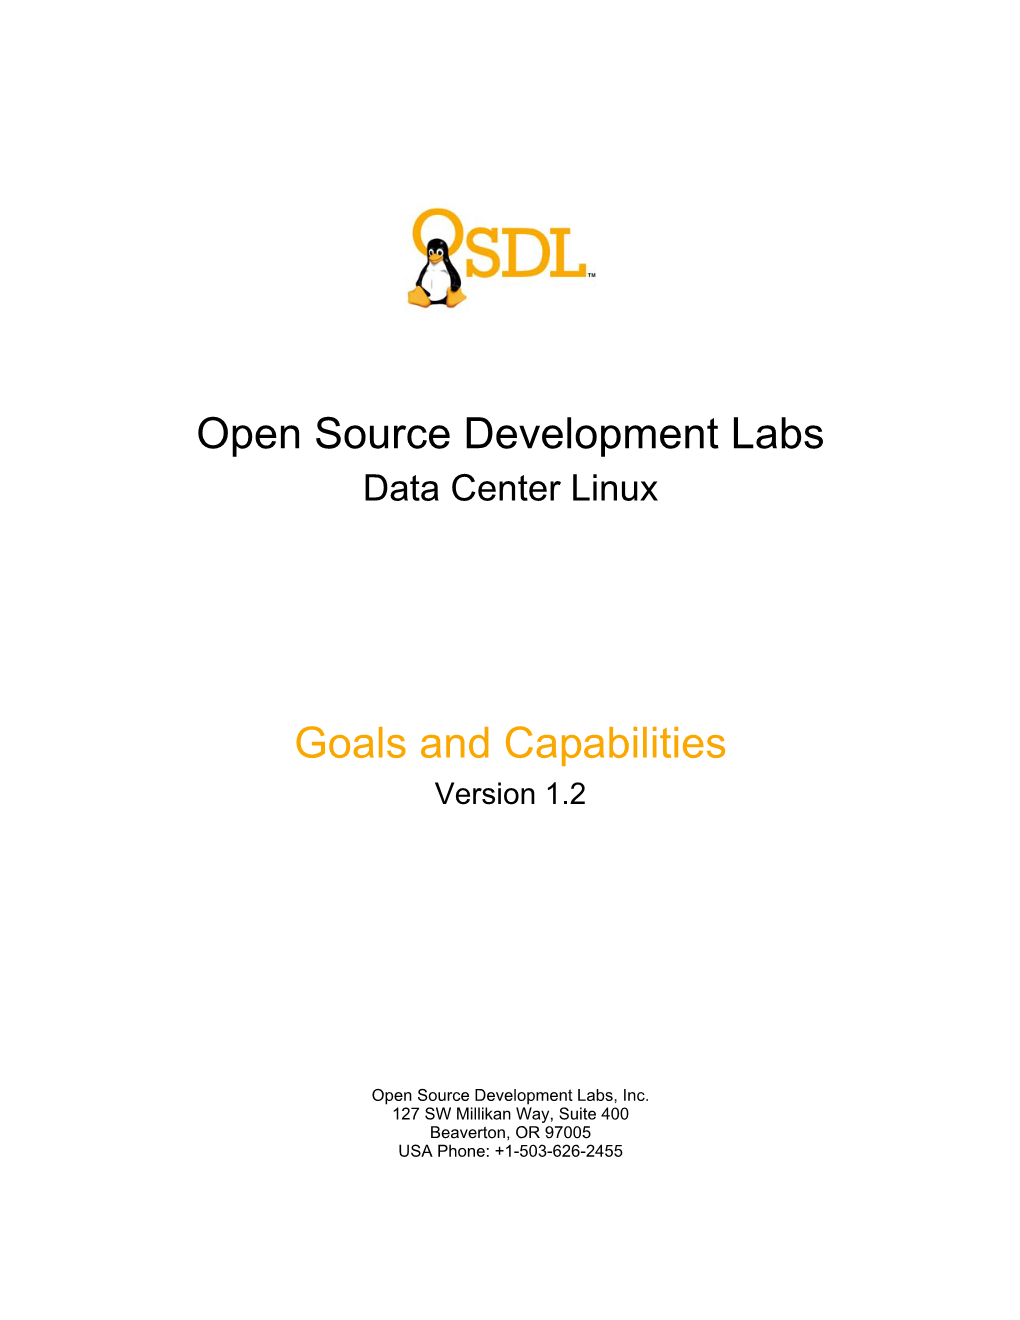 Data Center Linux Goals and Capabilities